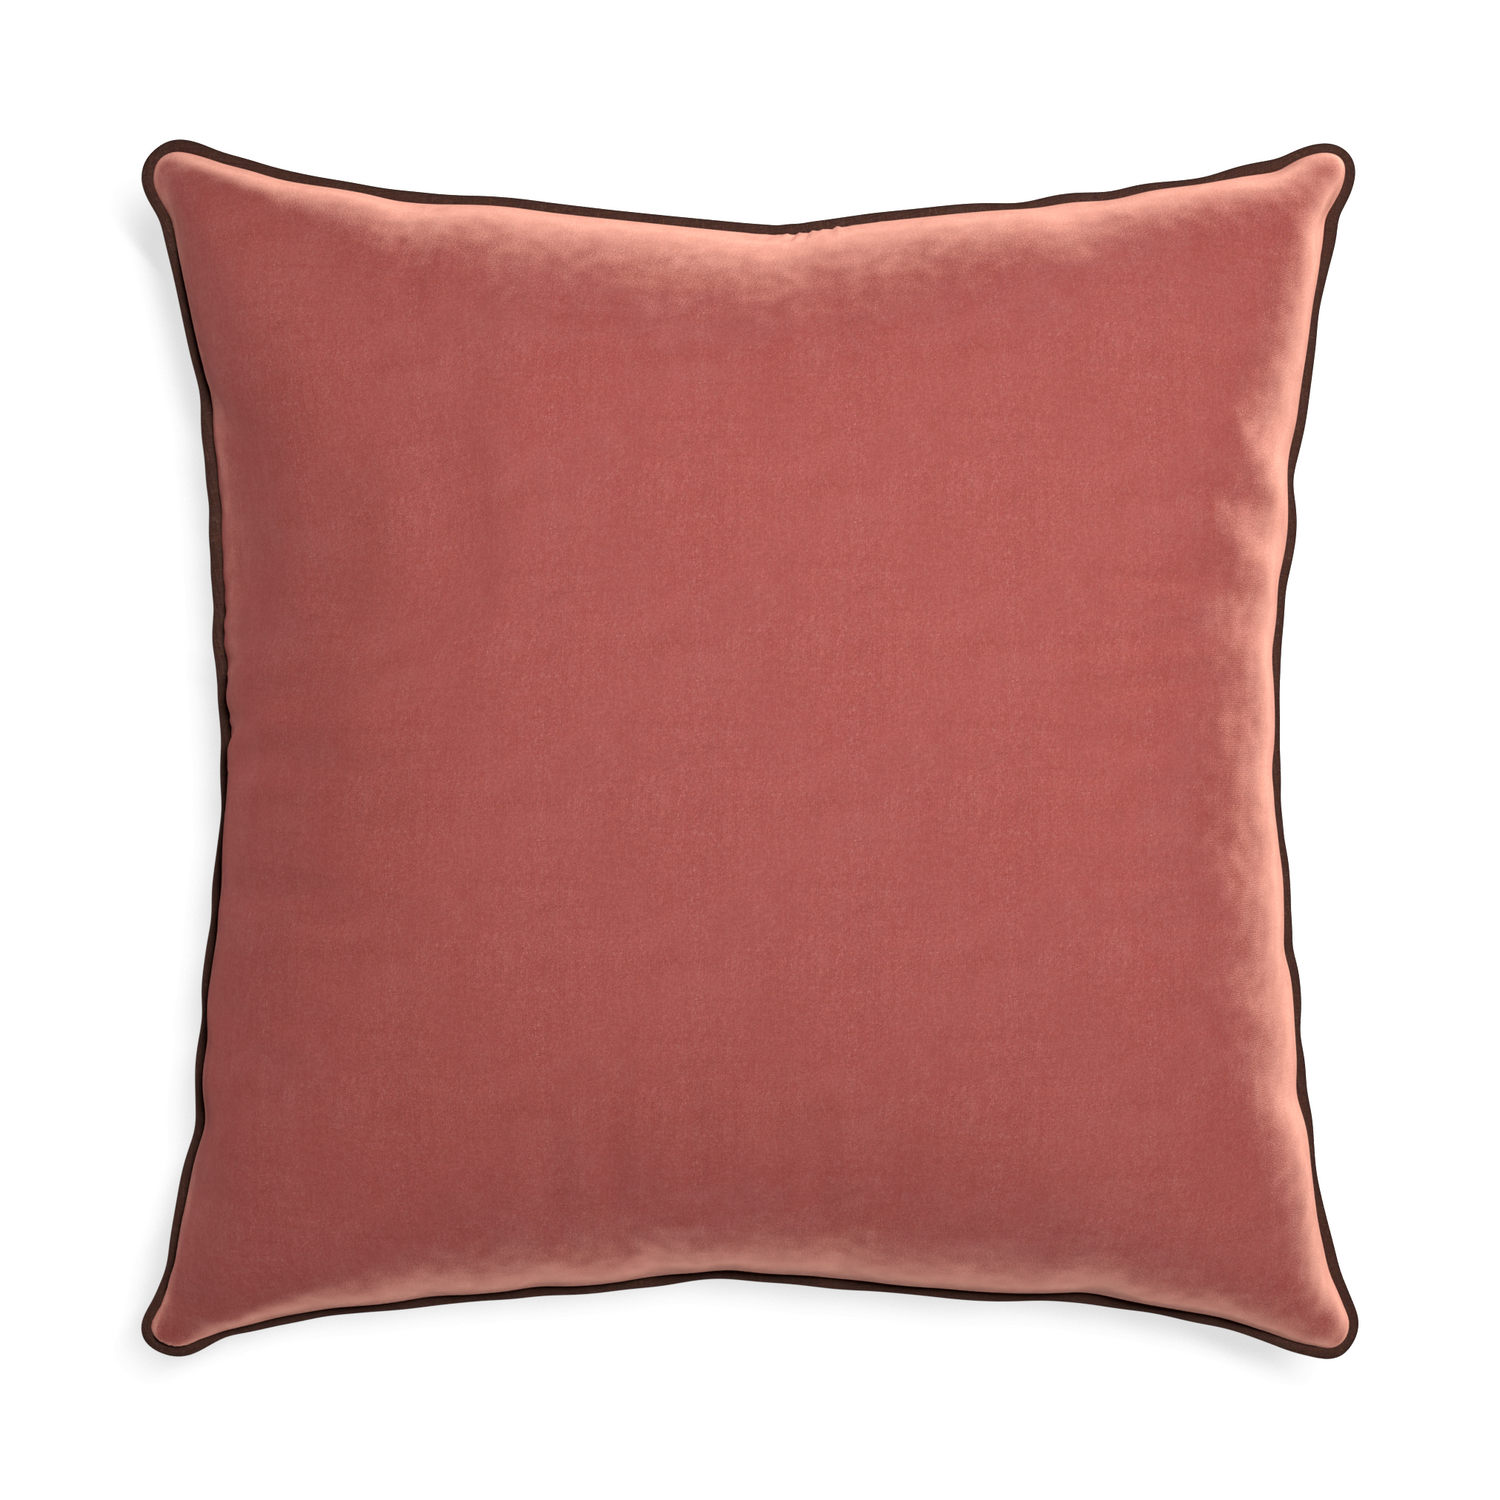 Euro-sham cosmo velvet custom coralpillow with w piping on white background